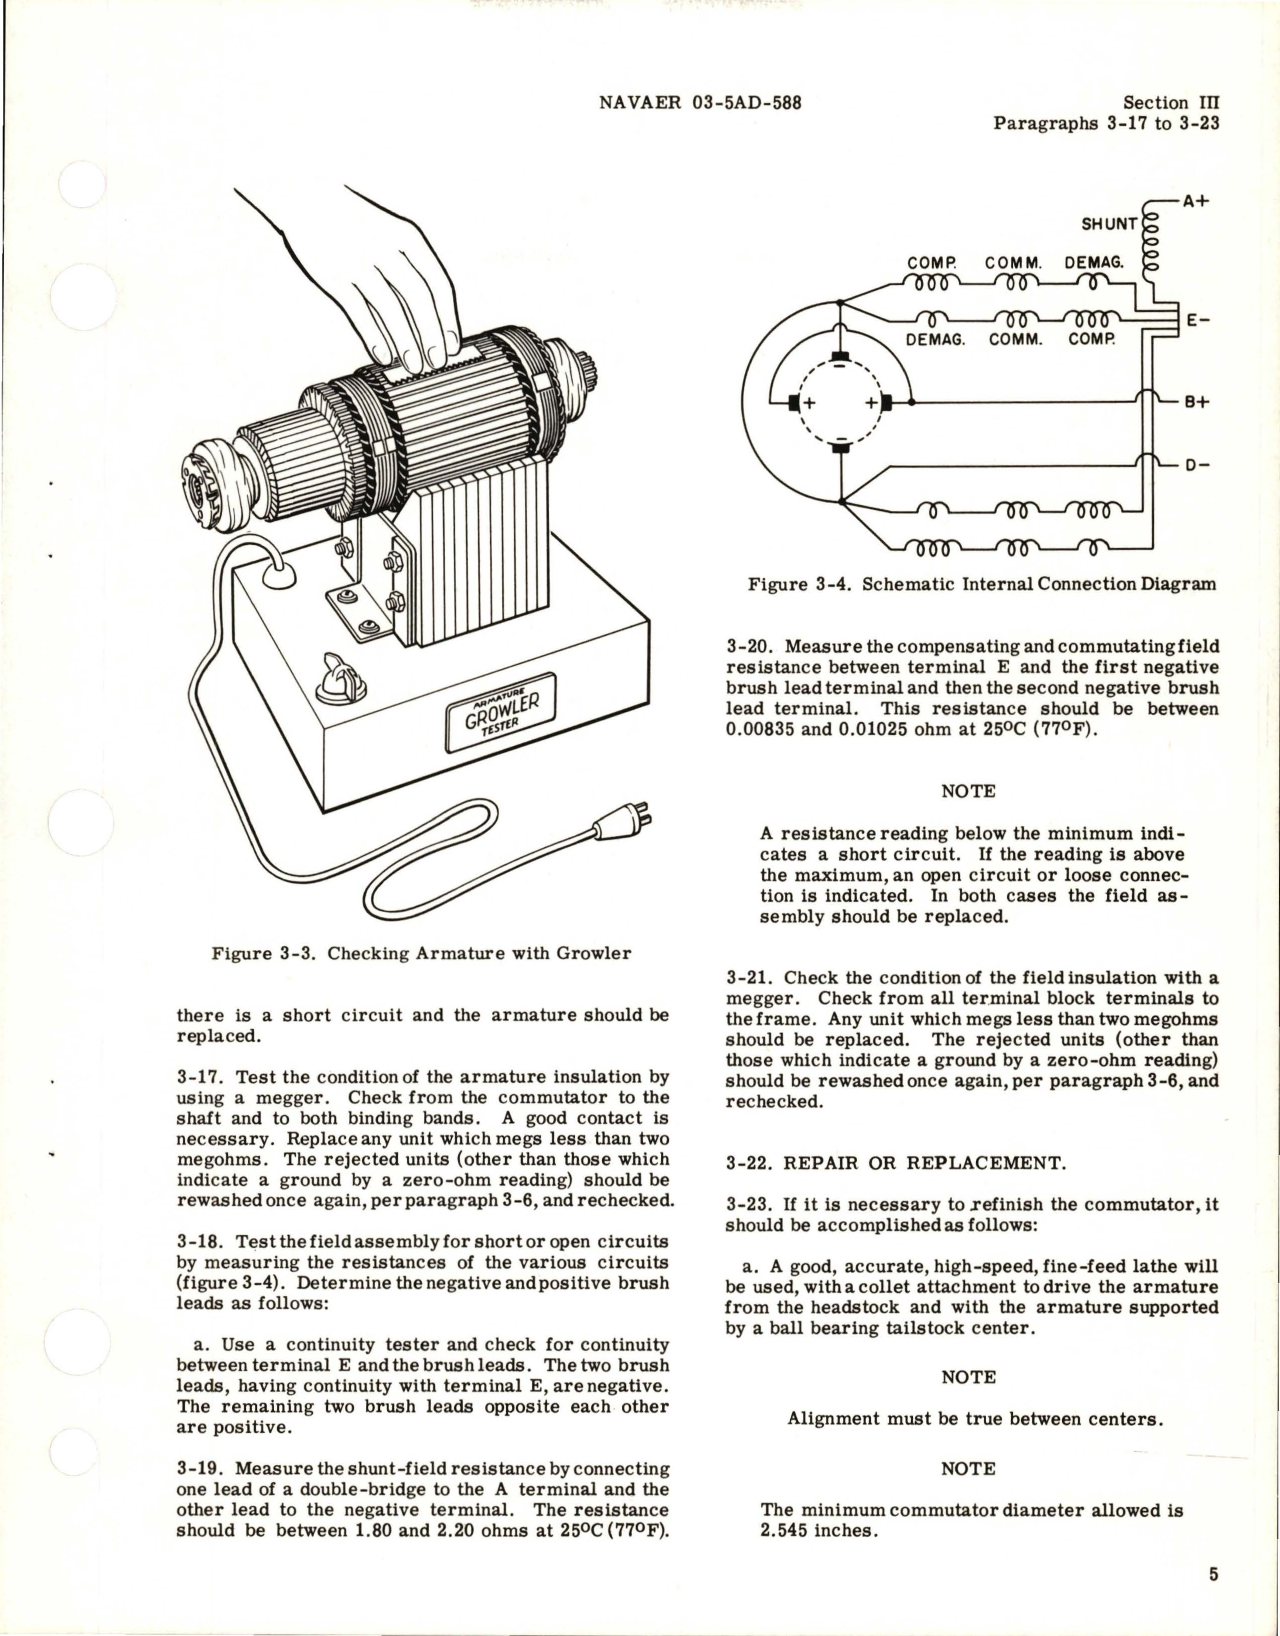 Sample page 9 from AirCorps Library document: Service and Overhaul Instructions for DC Generator - Models 2CM76C4, 2CM76C4A, 2CM76E4, 2CM76E4C, and 2CM76E5 